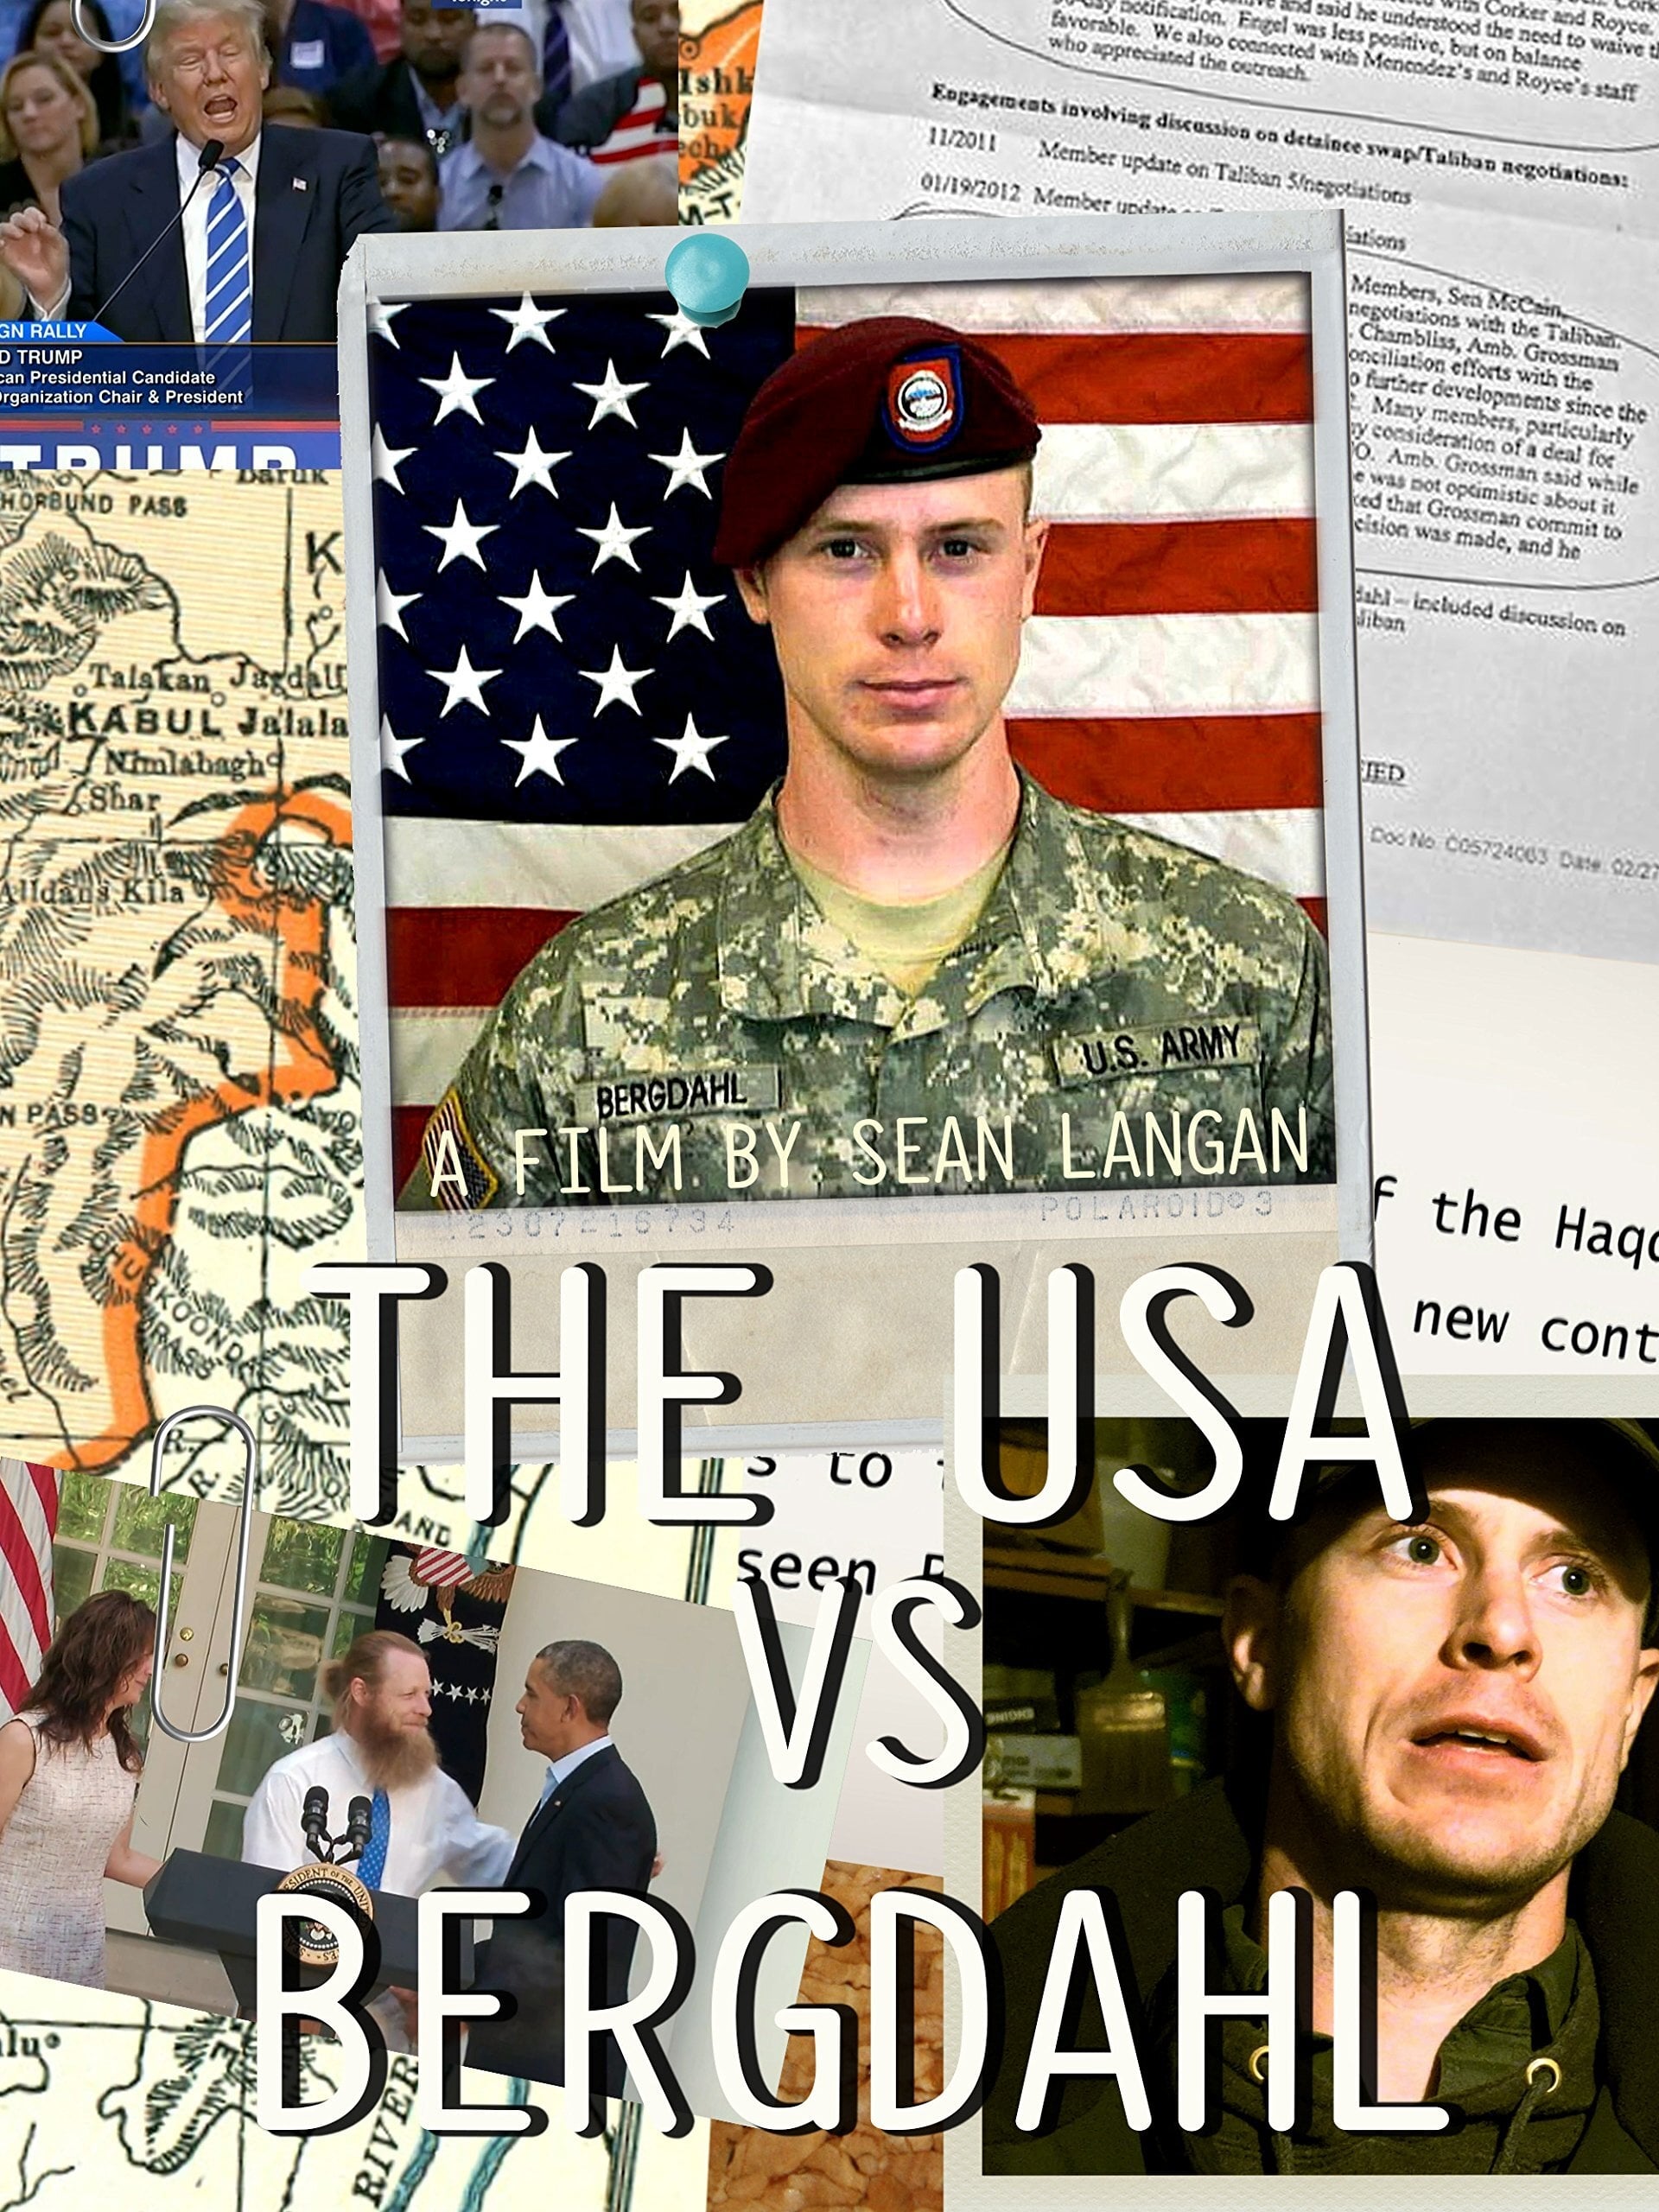 Coming Home: Bowe Bergdahl Vs. The United States